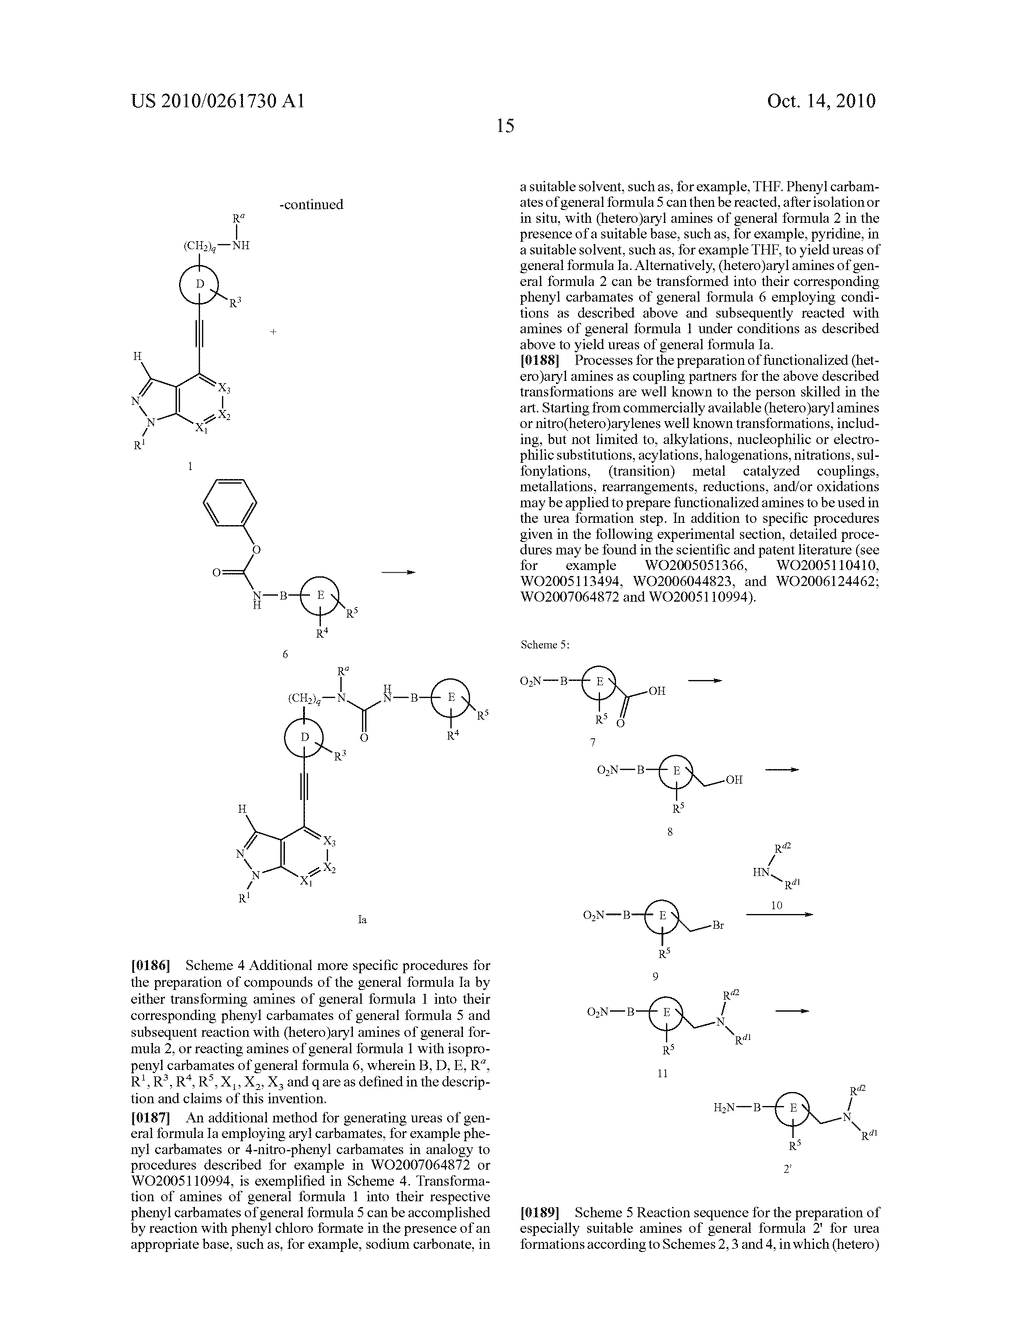 ALKYNYLARYL COMPOUNDS AND SALTS THEREOF, PHARMACEUTICAL COMPOSITIONS COMPRISING SAME, METHODS OF PREPARING SAME AND USES OF SAME - diagram, schematic, and image 16